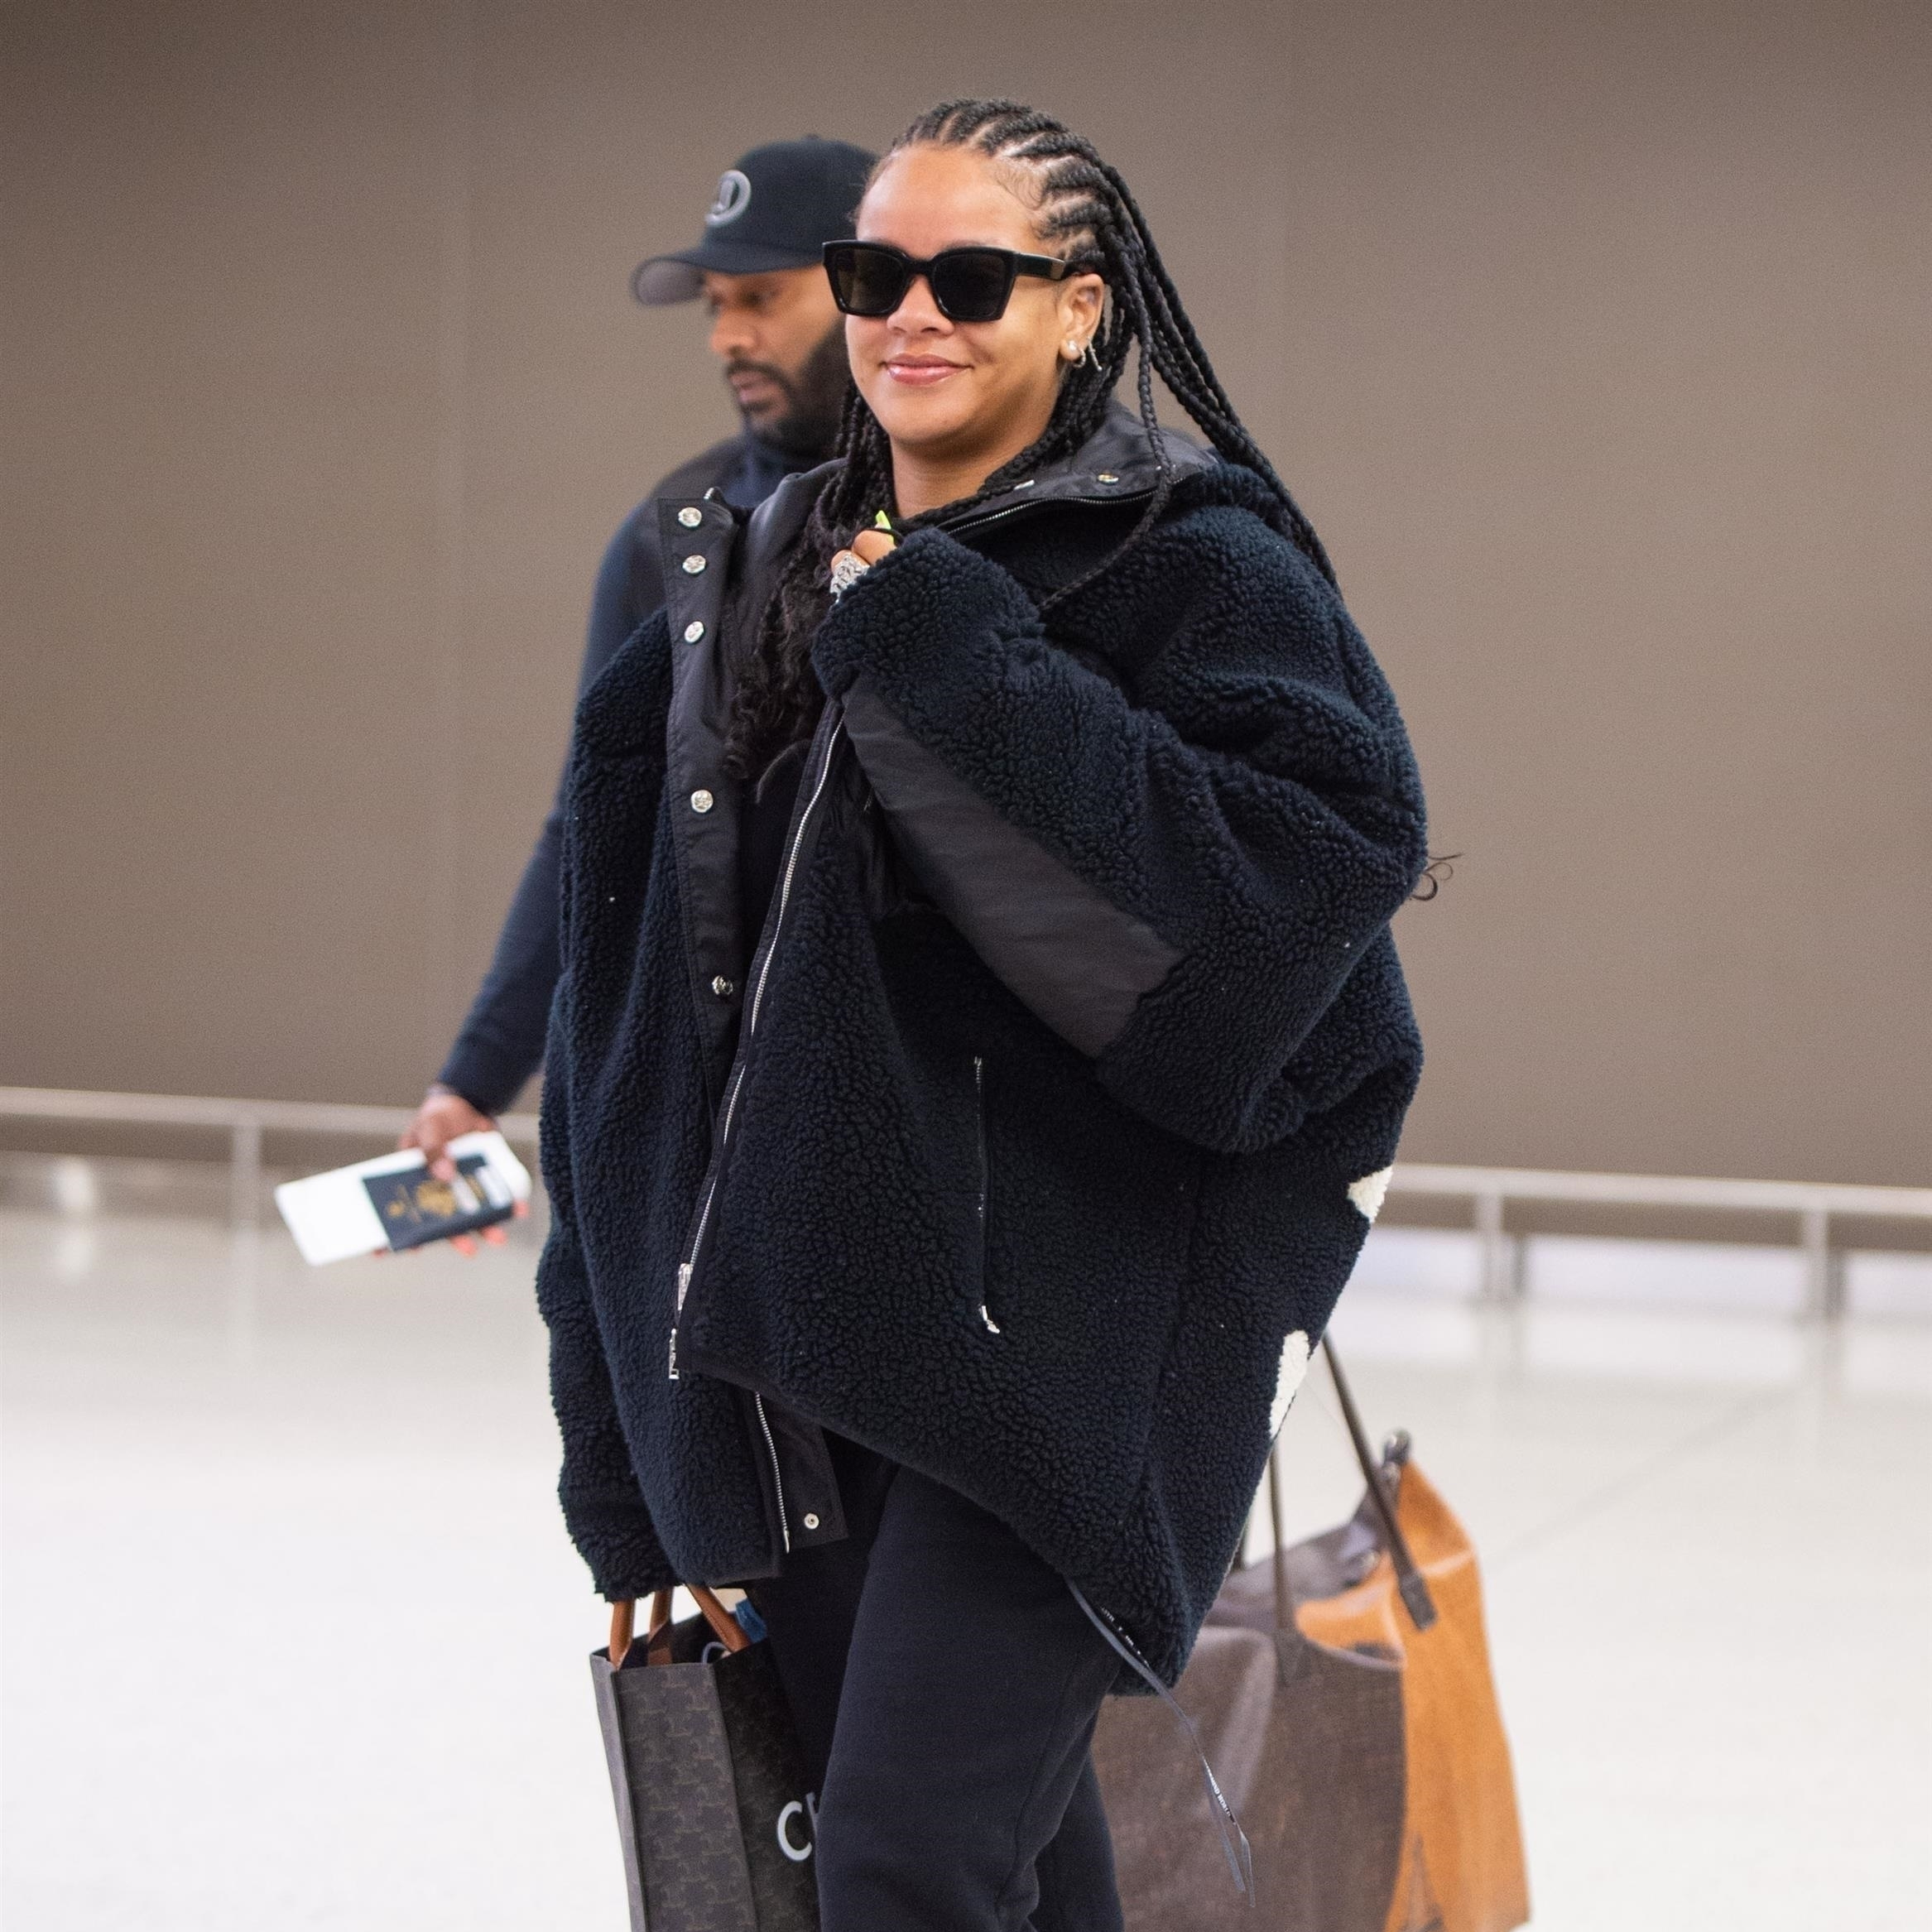 These Are the Best Celeb-Inspired Sneaker Trends of 2018 — So Far